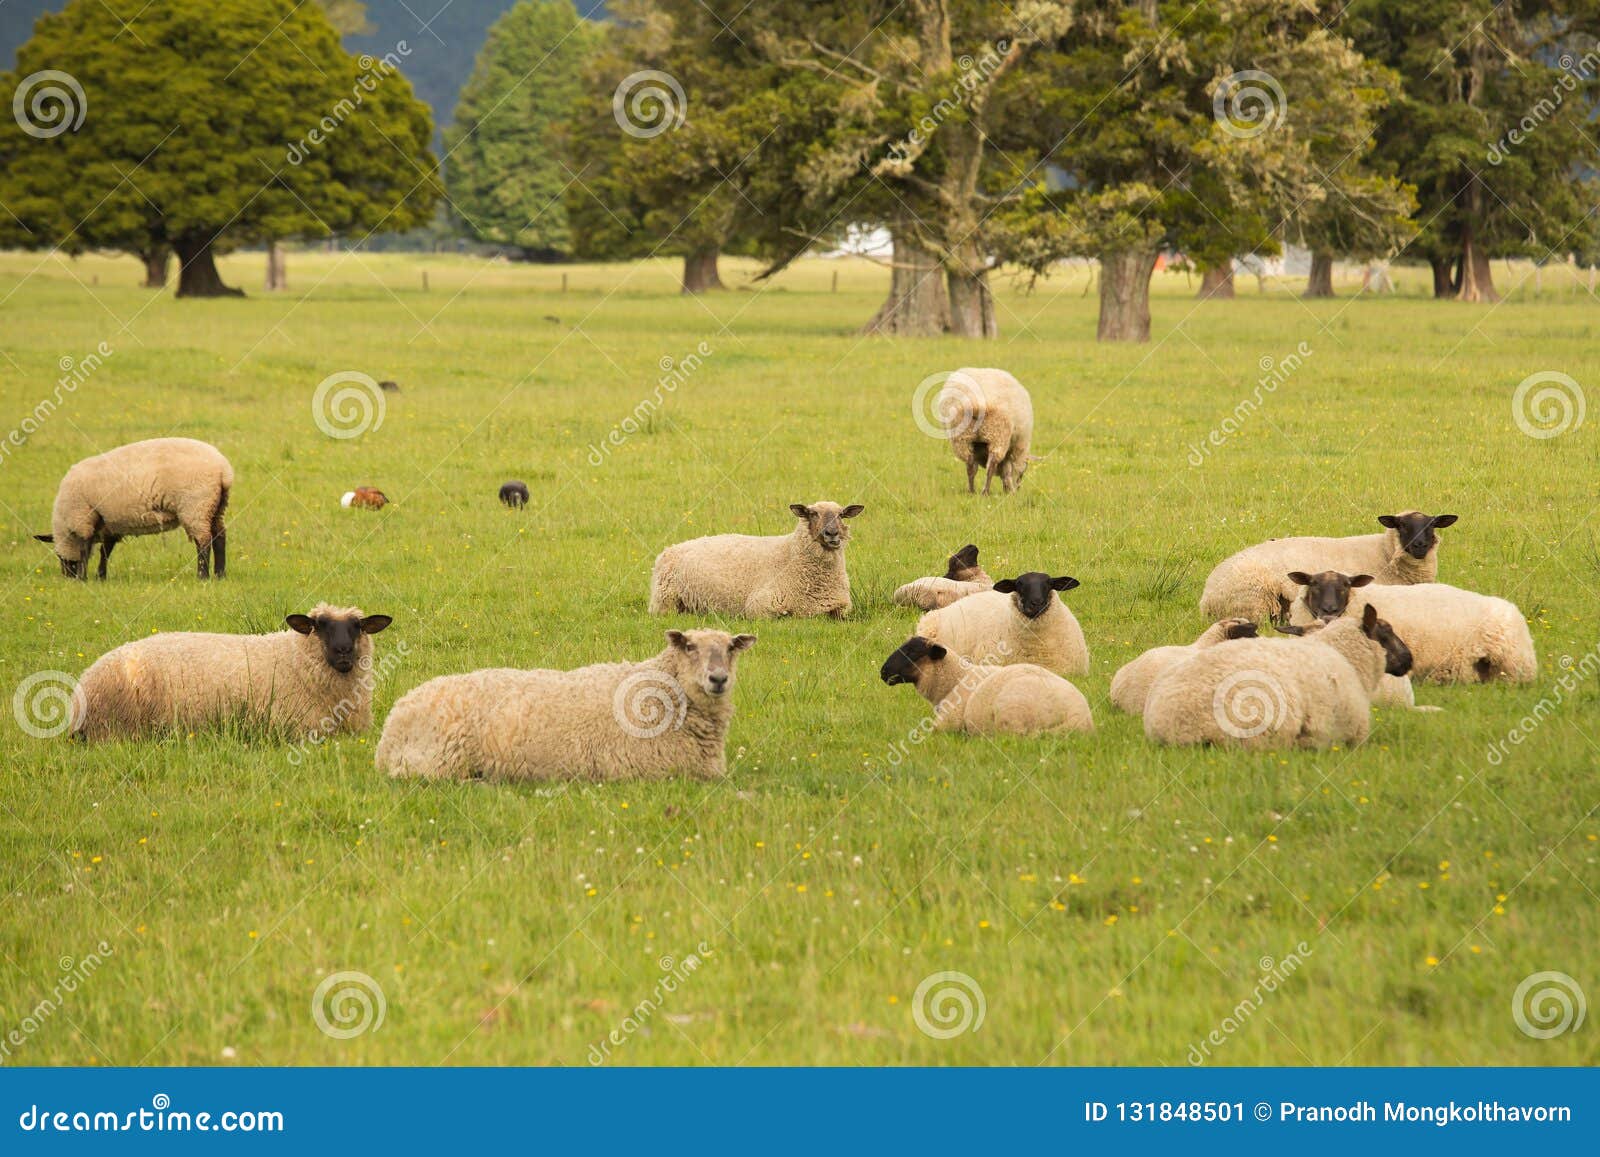 Sheep Setting on Green Glass Stock Image - Image of scenic, farming:  131848501